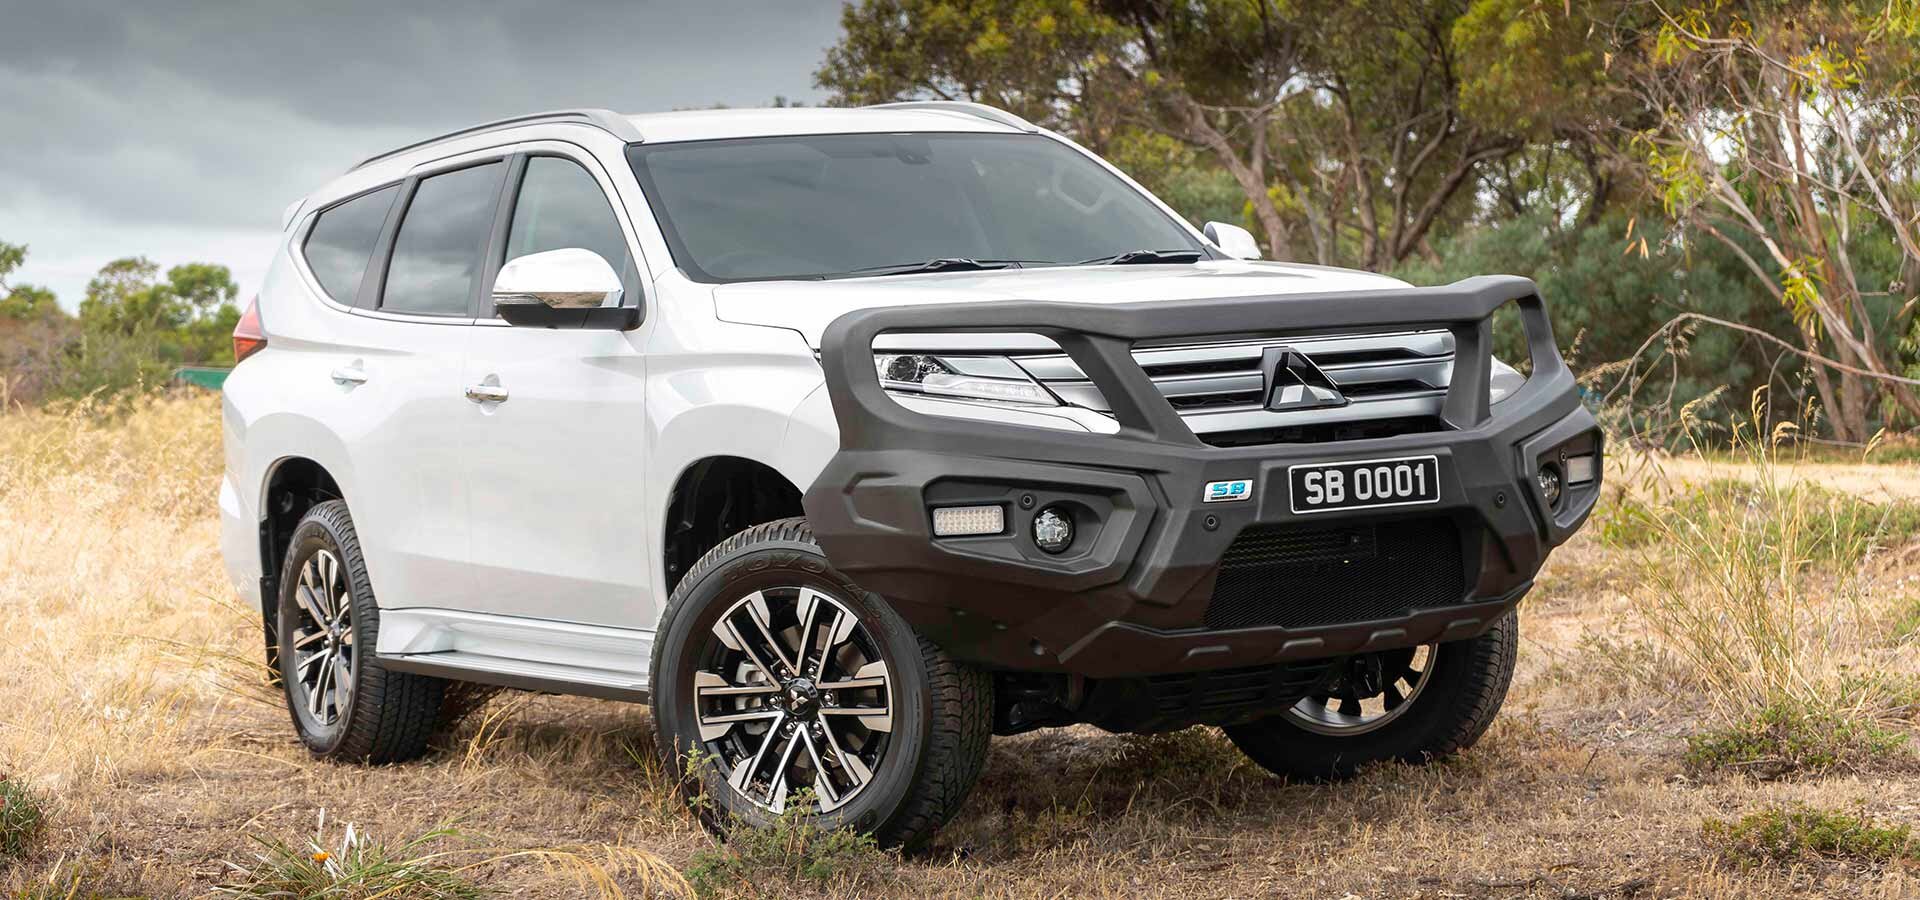 Pajero Sport Exceed: Literally more vehicle for less money.